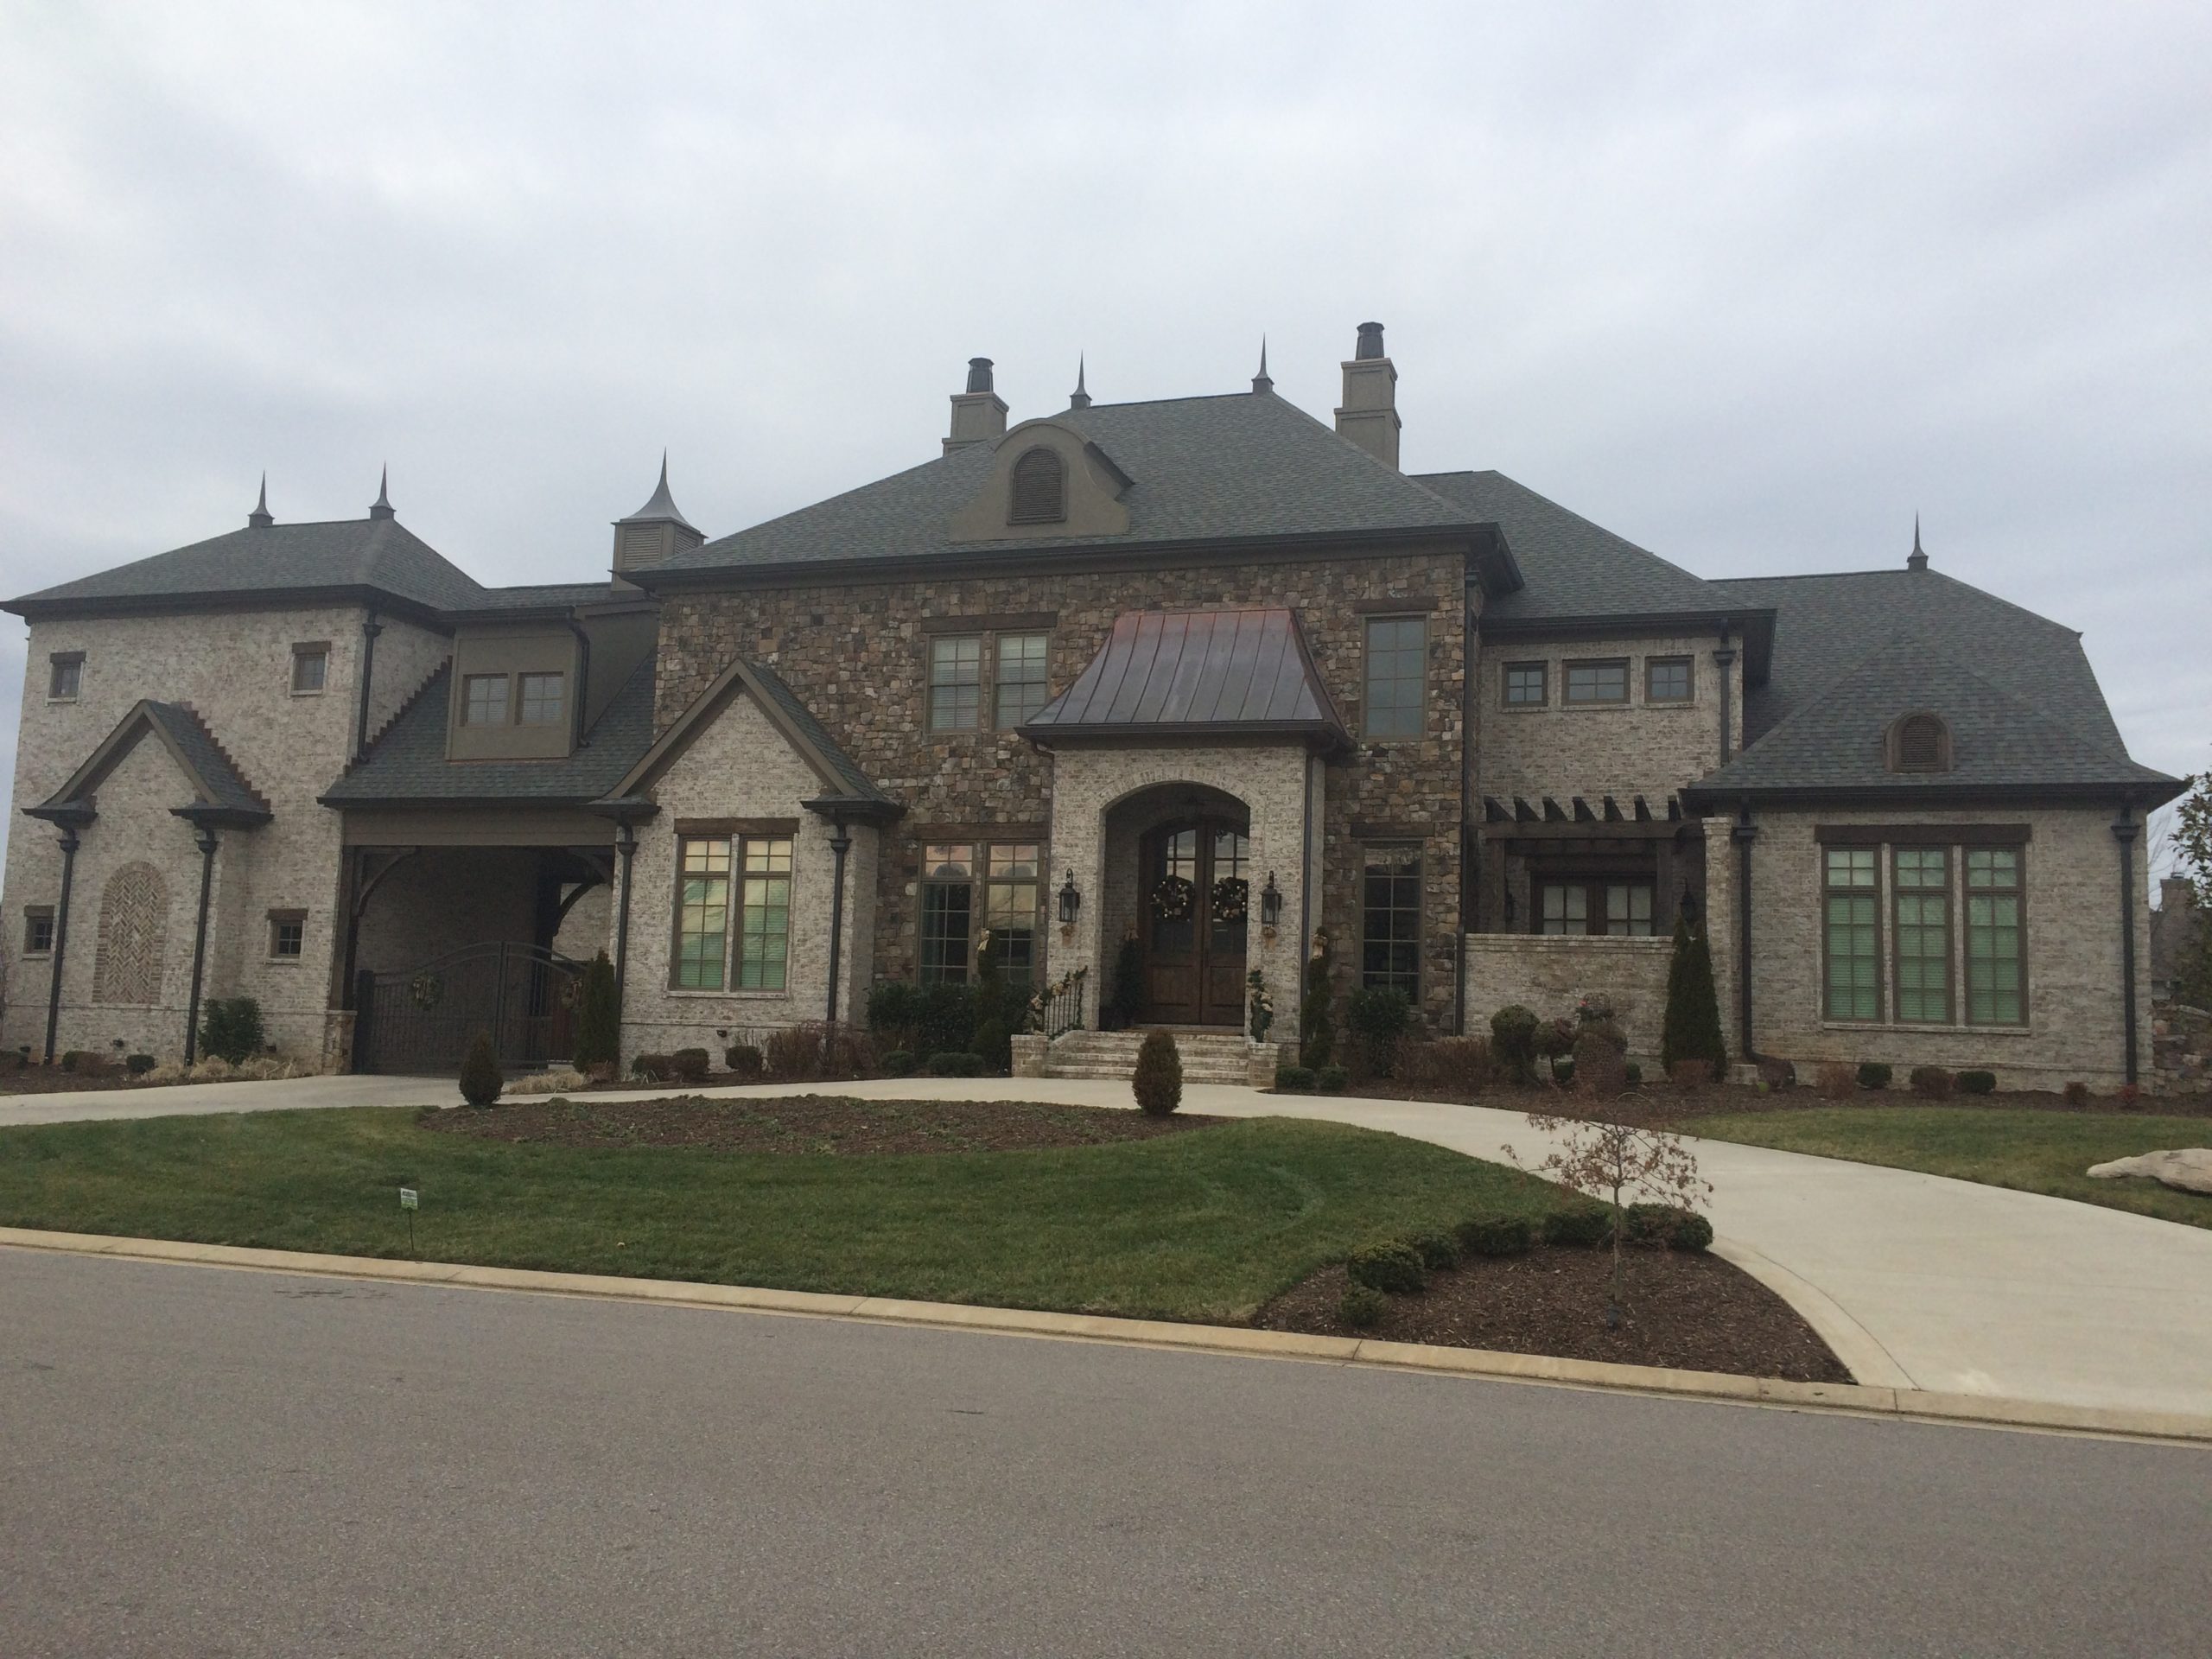 One of our luxury roof designs for a house model in Governor's Club in Brentwood, TN